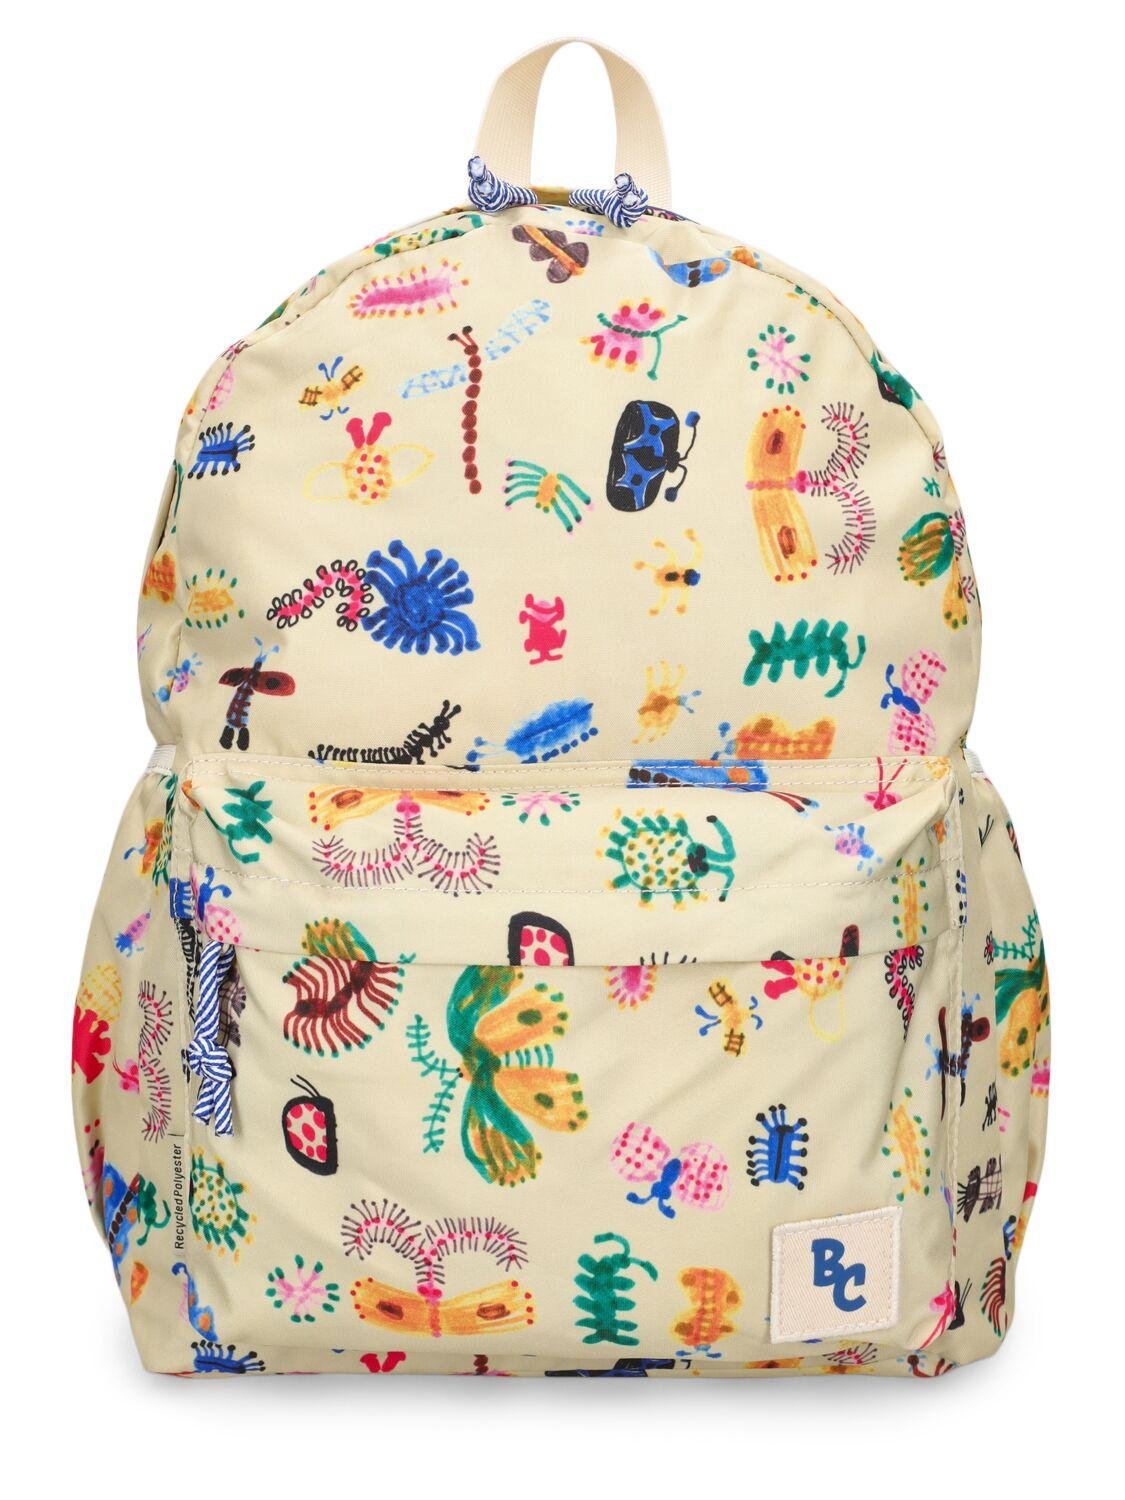 Printed Recycled Poly Backpack by BOBO CHOSES